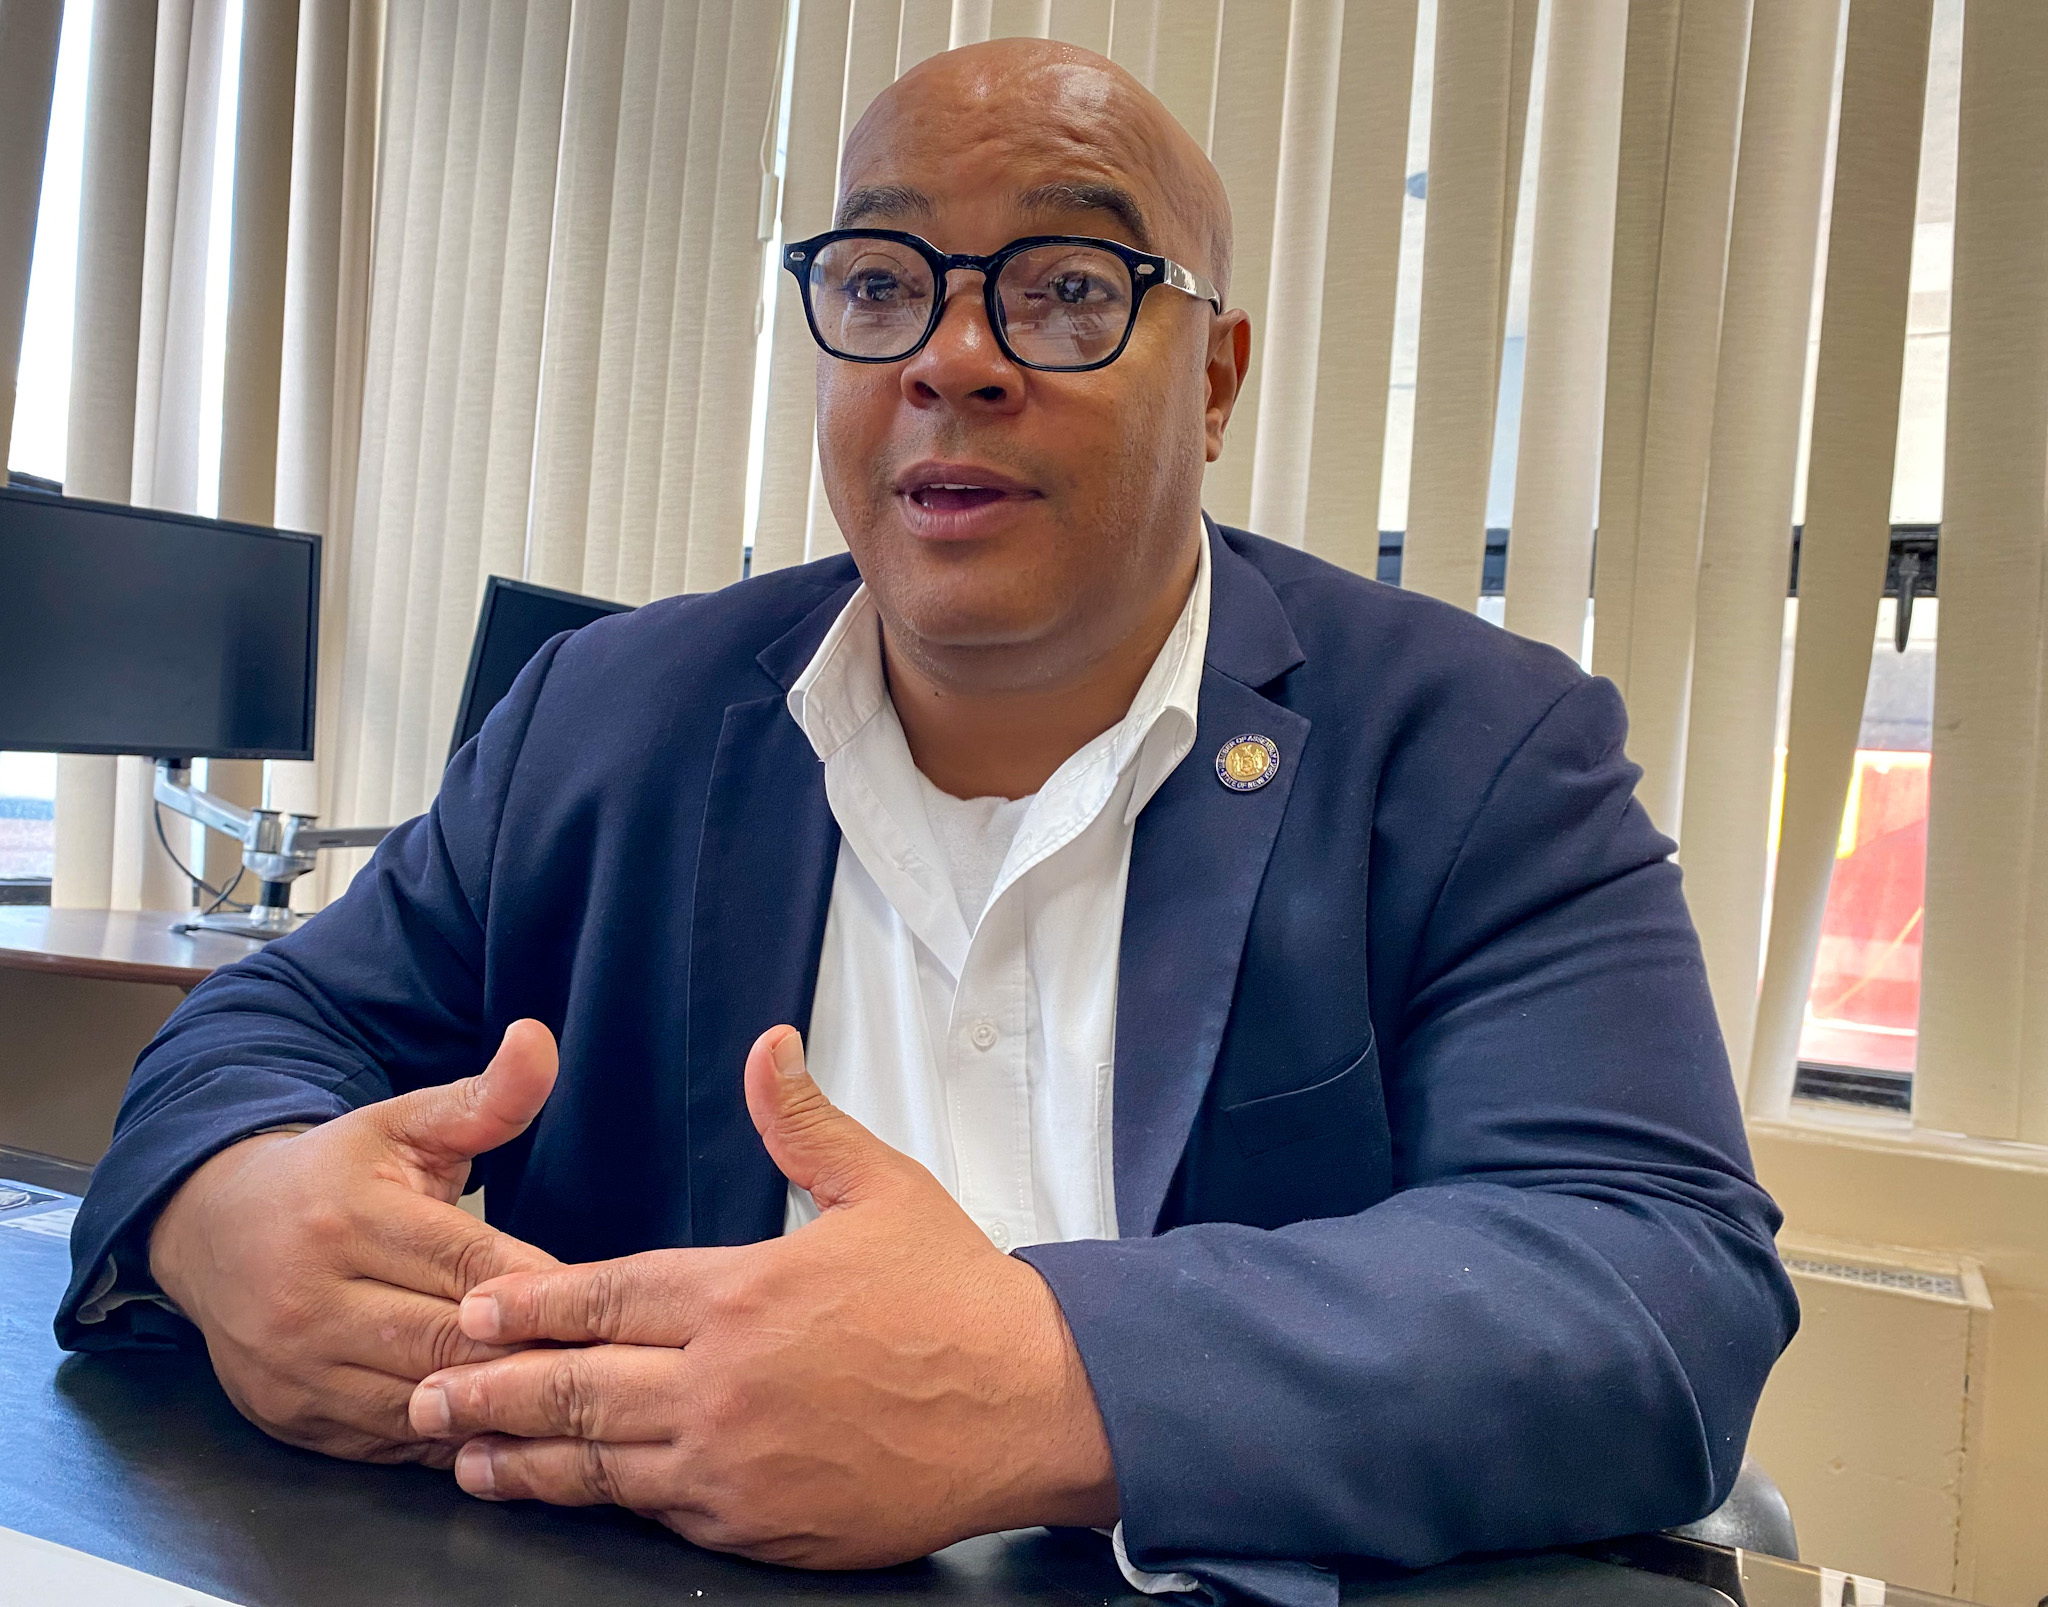 “I knew people wanted me to fail, so that was motivation for me,” Assemblymember Eddie Gibbs said in an office in East Harlem on October 17.